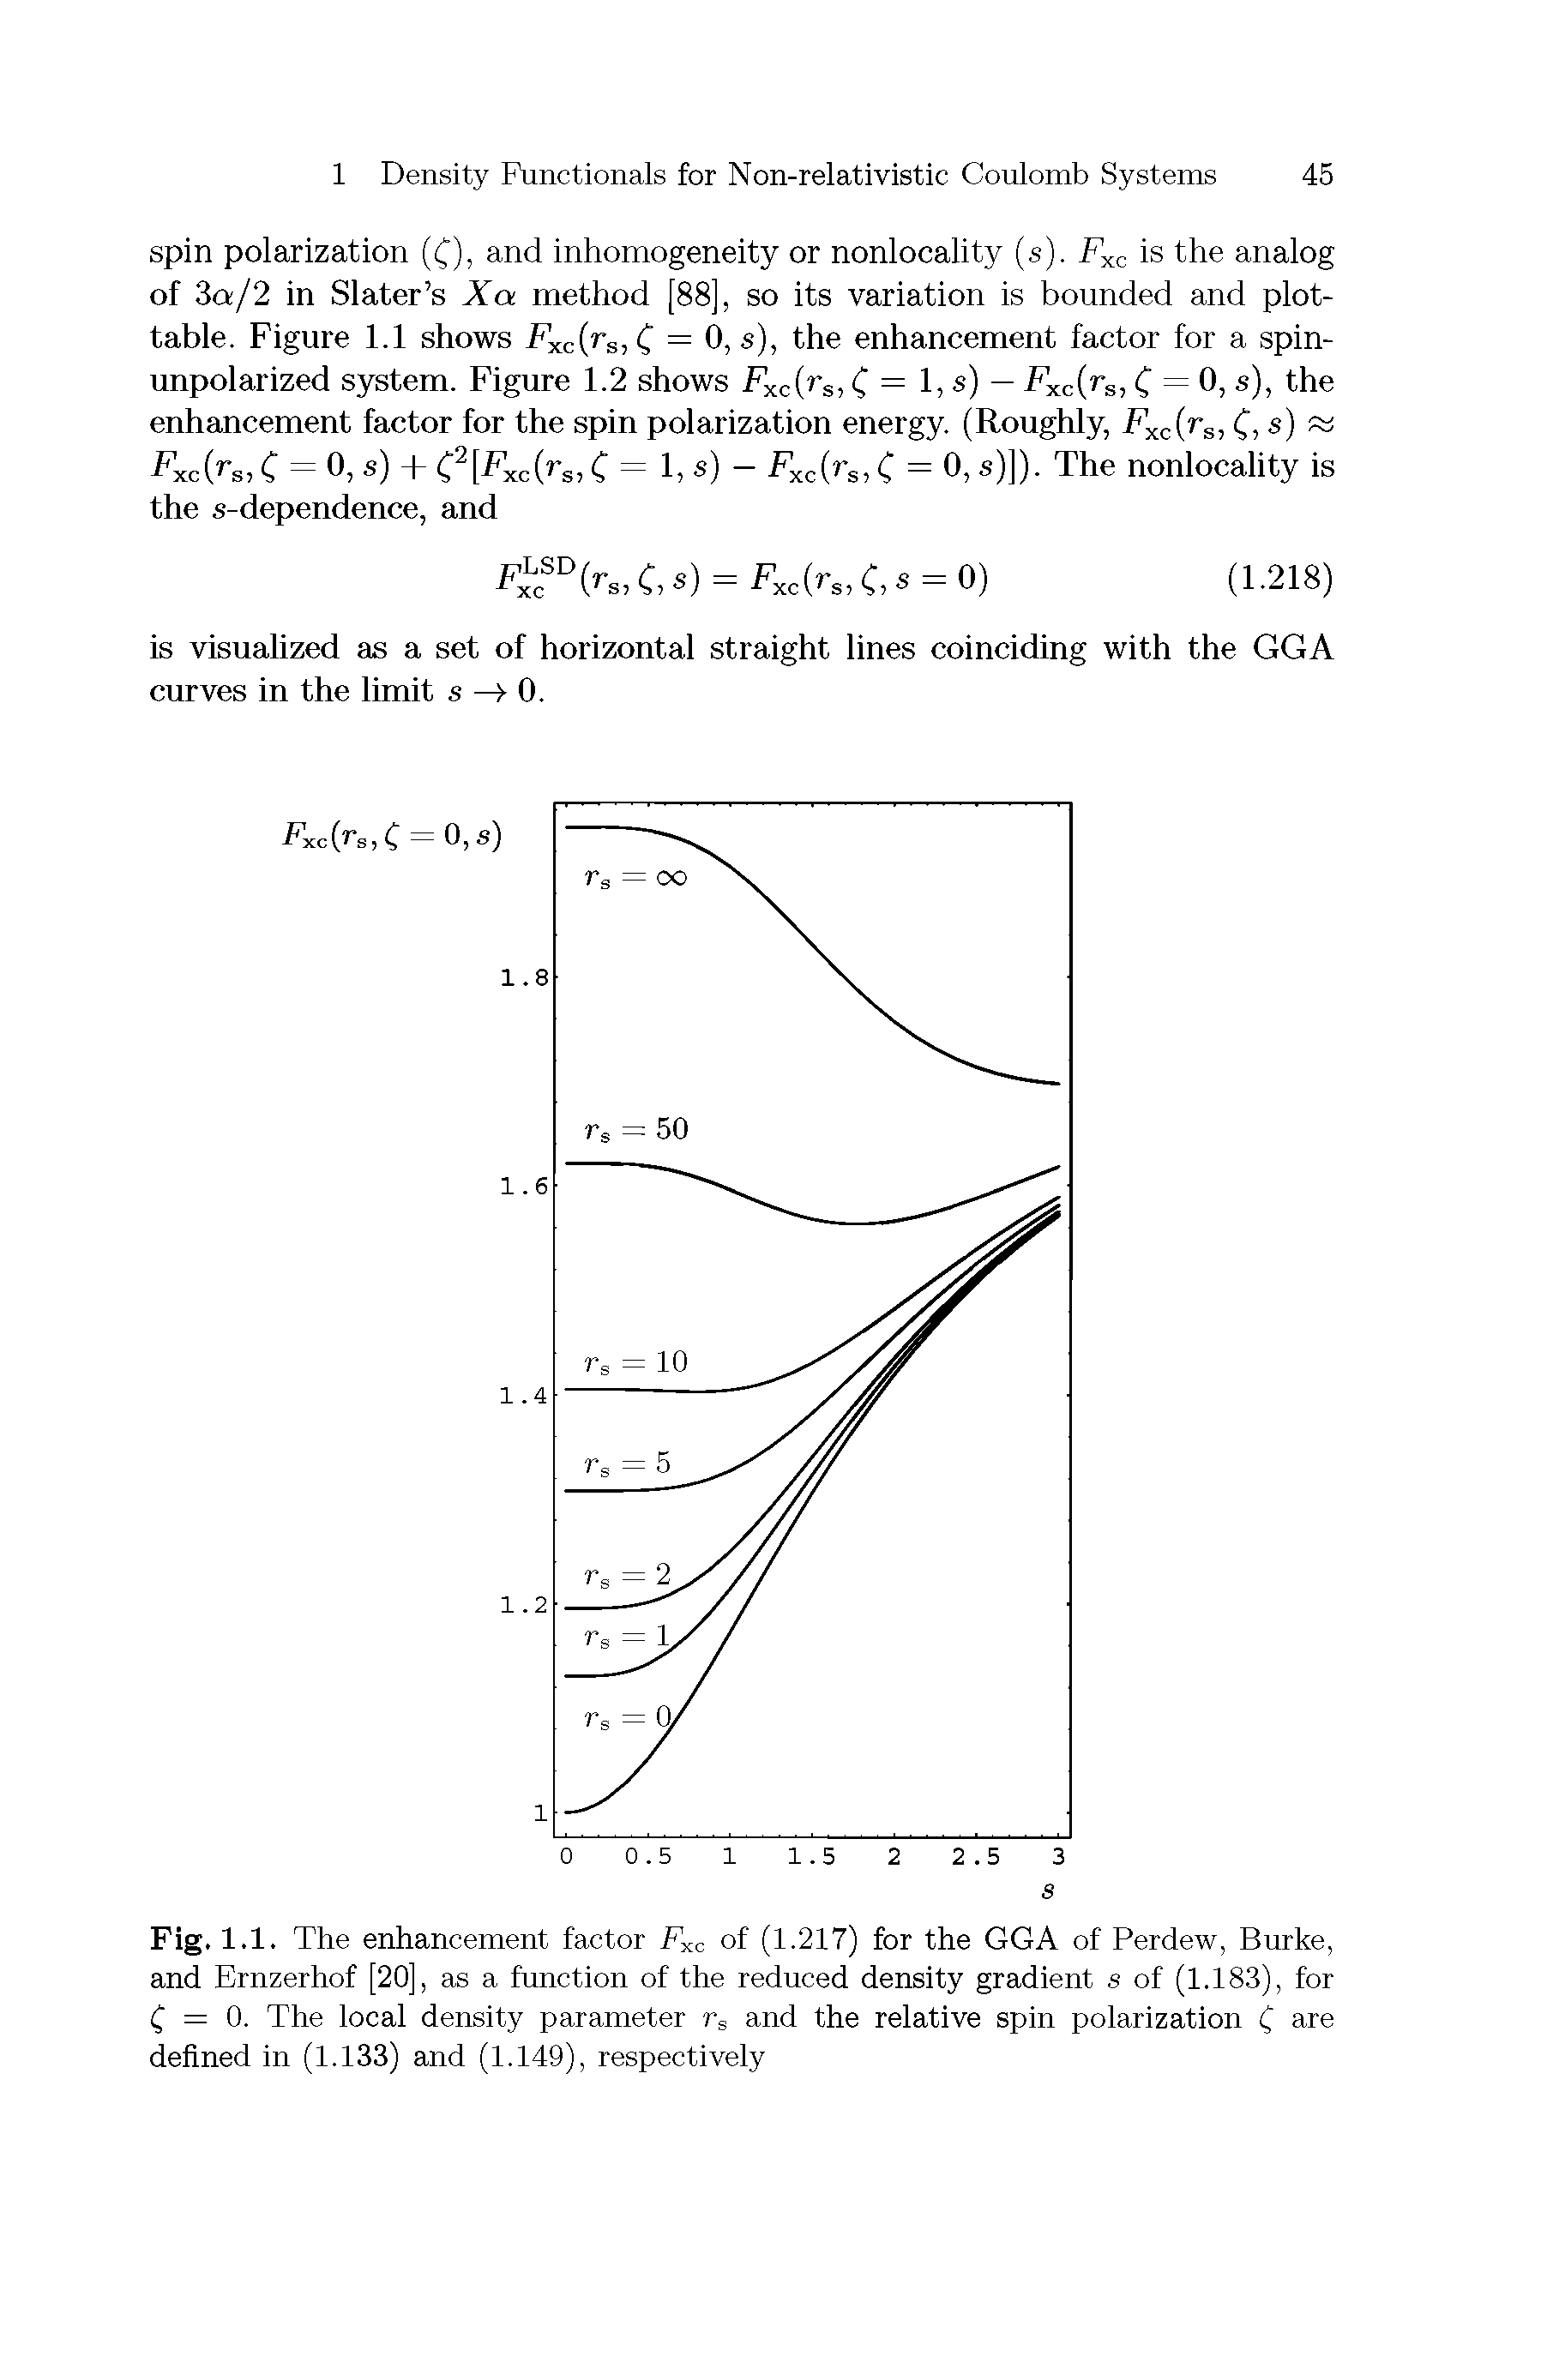 Fig. 1.1. The enhancement factor iTc of (1.217) for the GGA of Perdew, Burke, and Ernzerhof [20], as a function of the reduced density gradient s of (1.183), for C = 0. The local density parameter Vs and the relative spin polarization C are defined in (1.133) and (1.149), respectively...